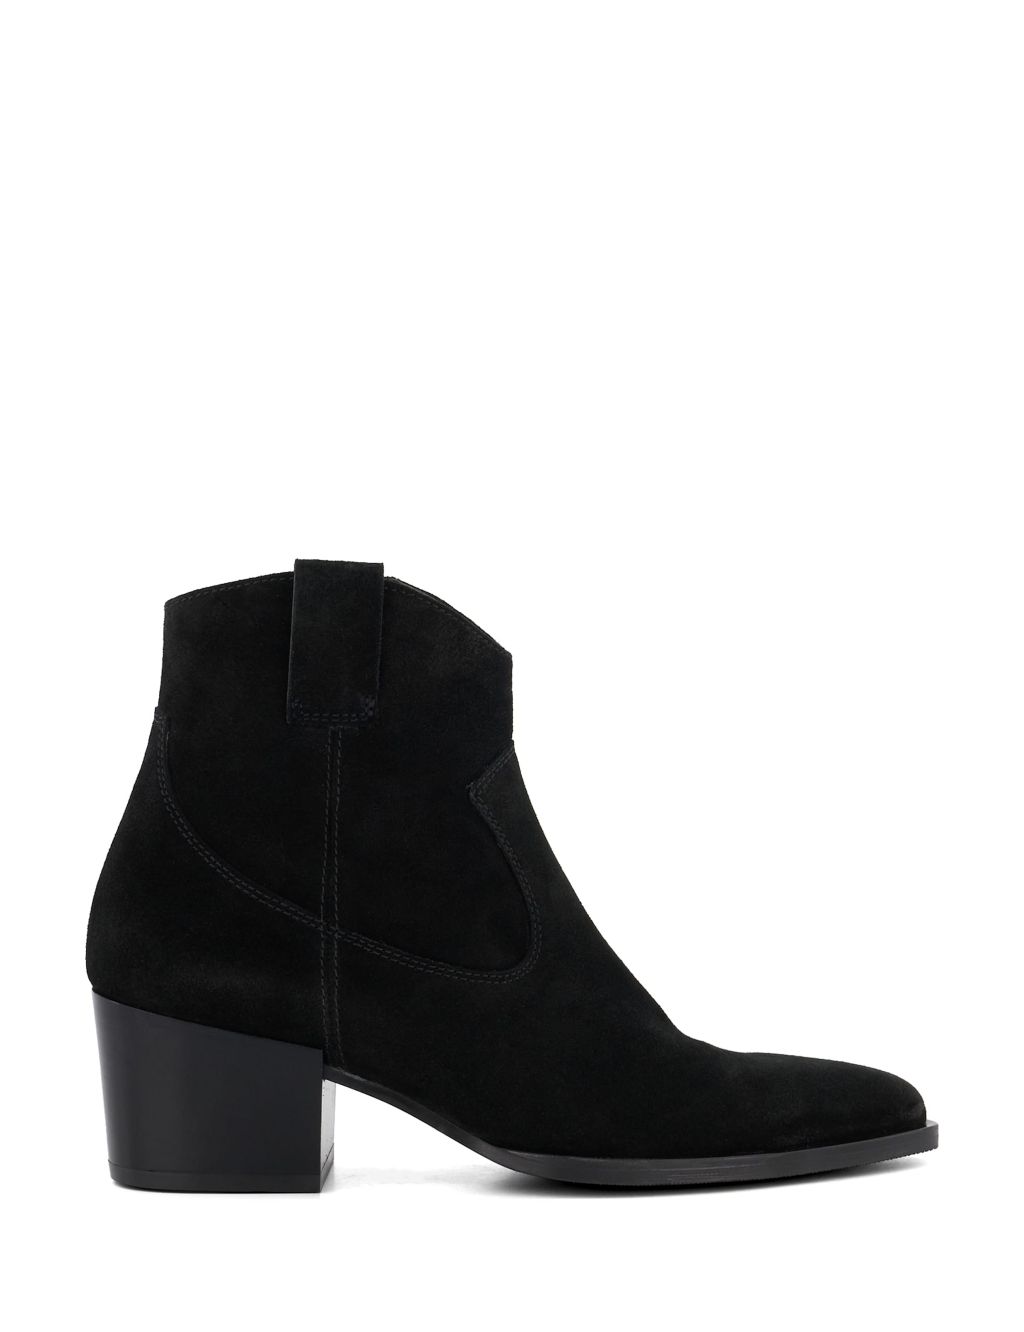 Suede Cow Boy Block Heel Ankle Boots 3 of 4